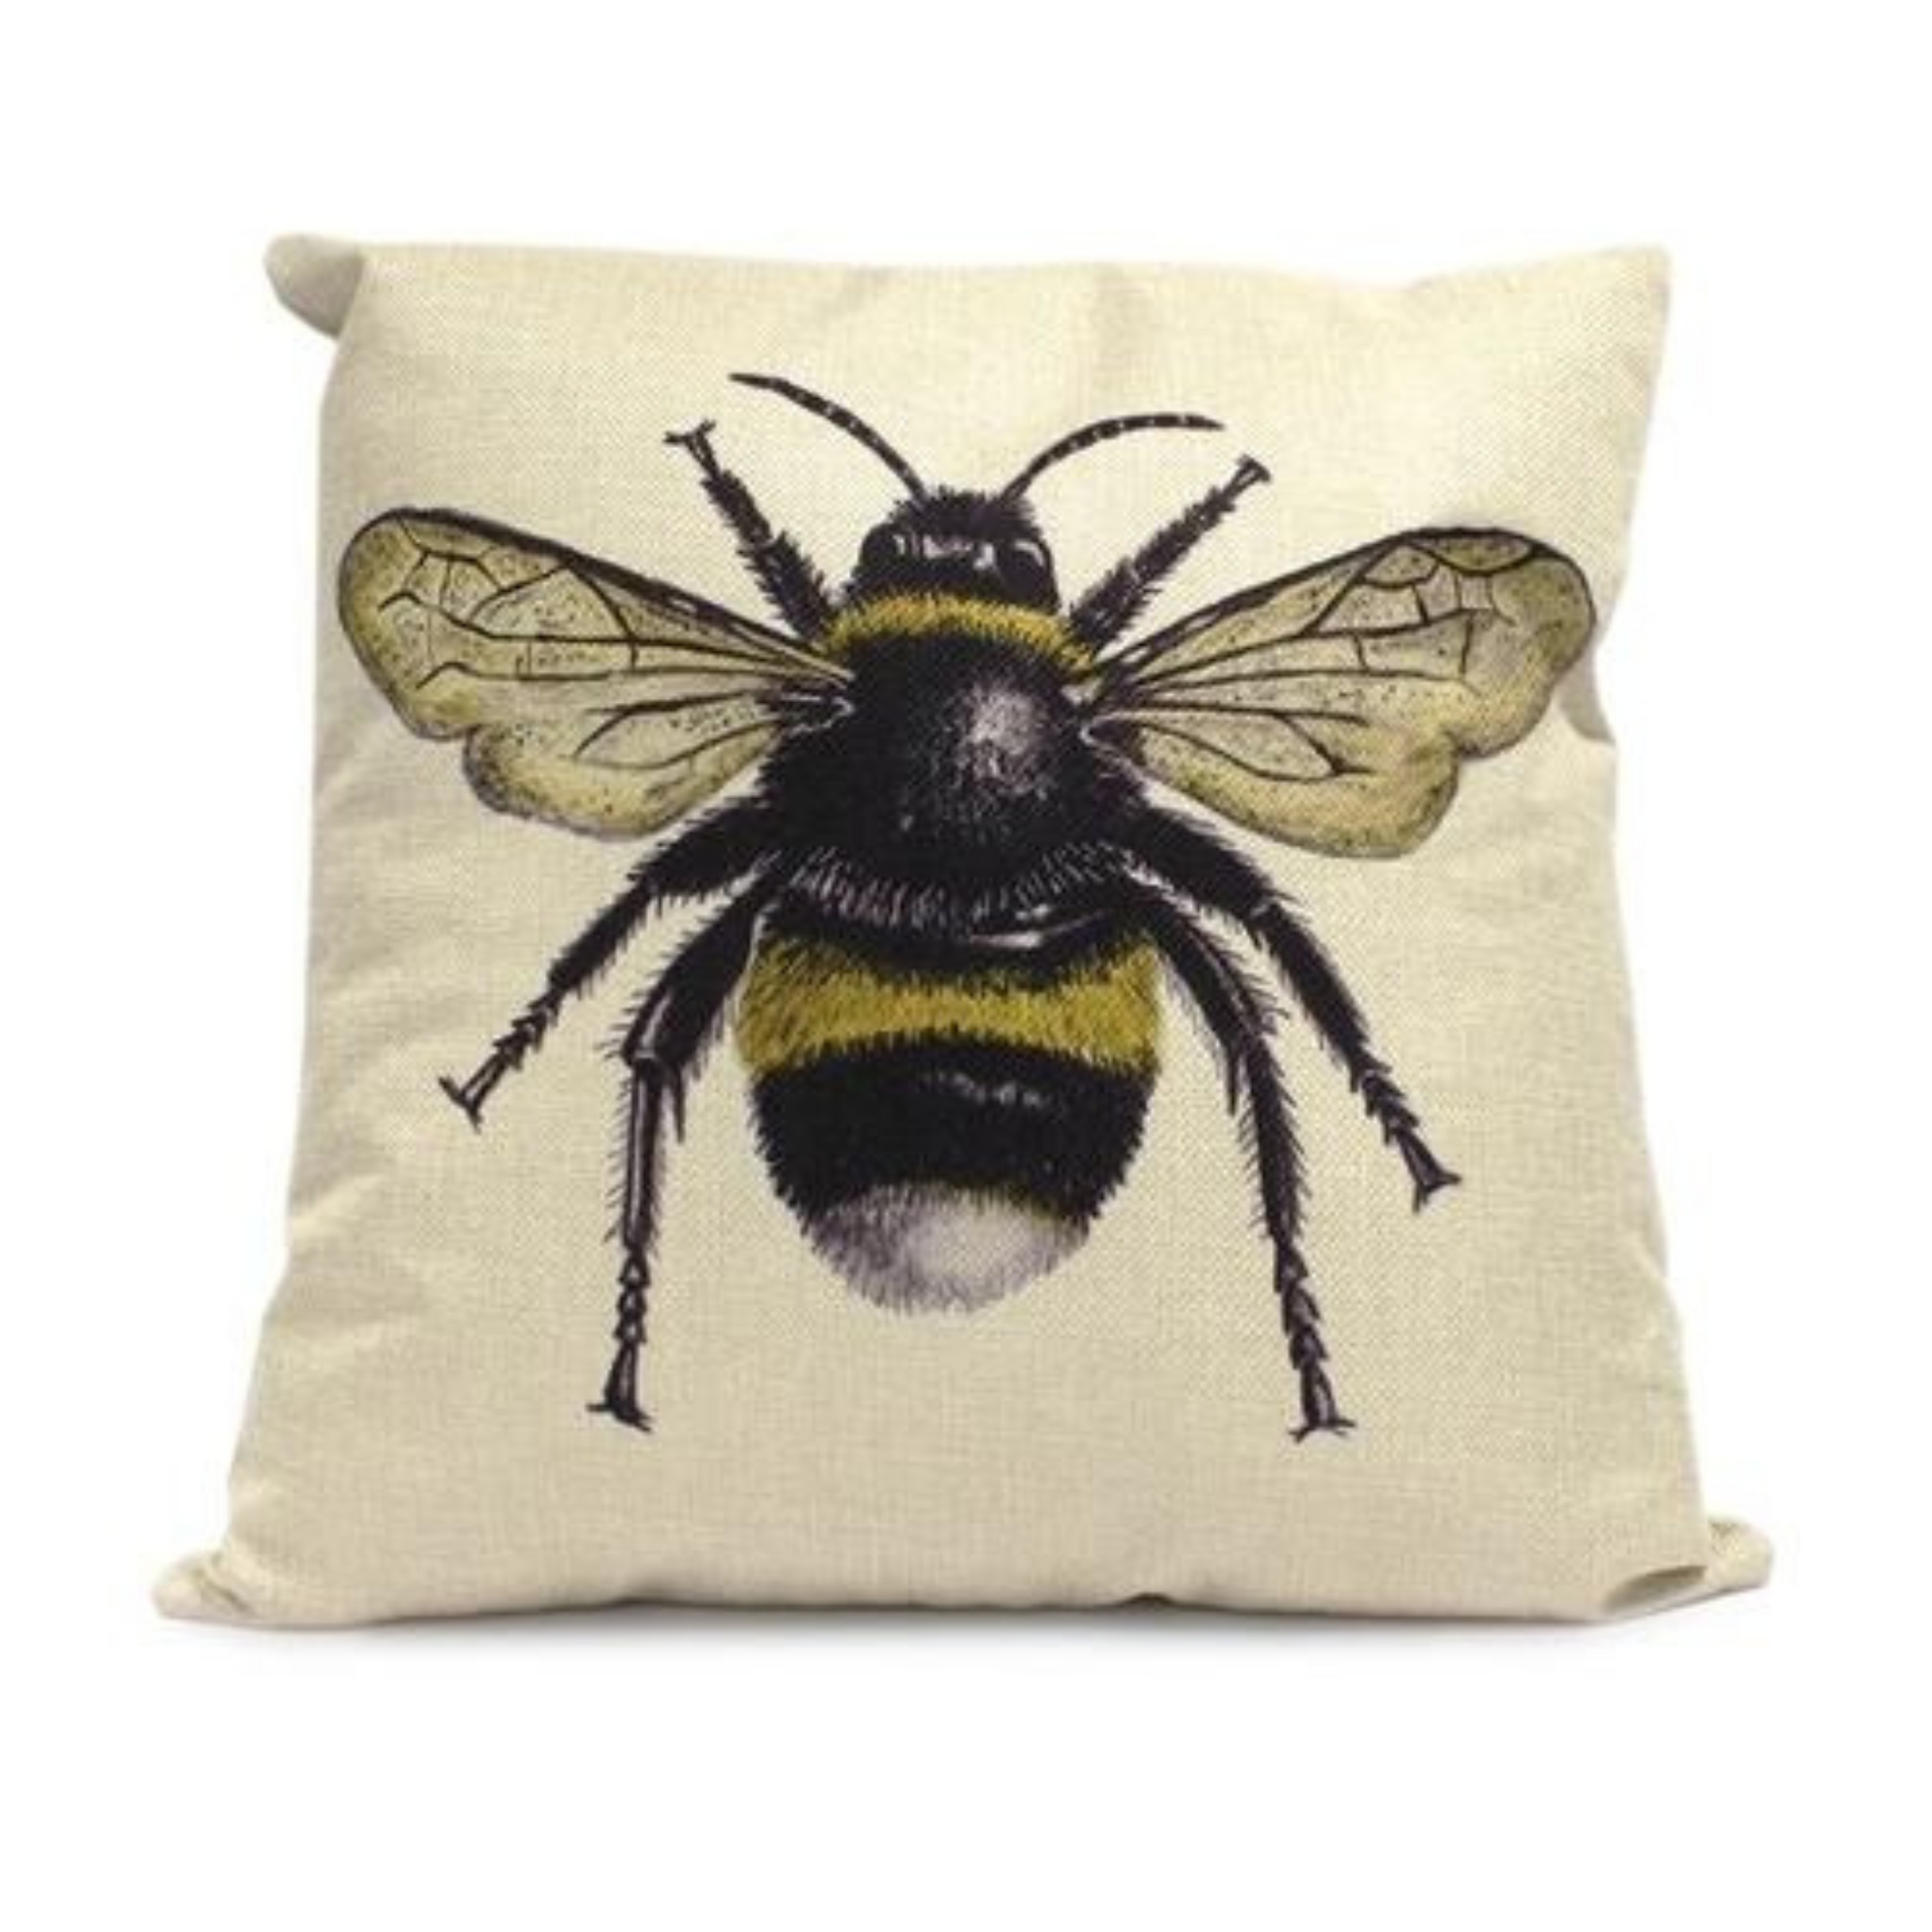 Personalised Cushion Cover 40cm x 40cm - Bumble Bee